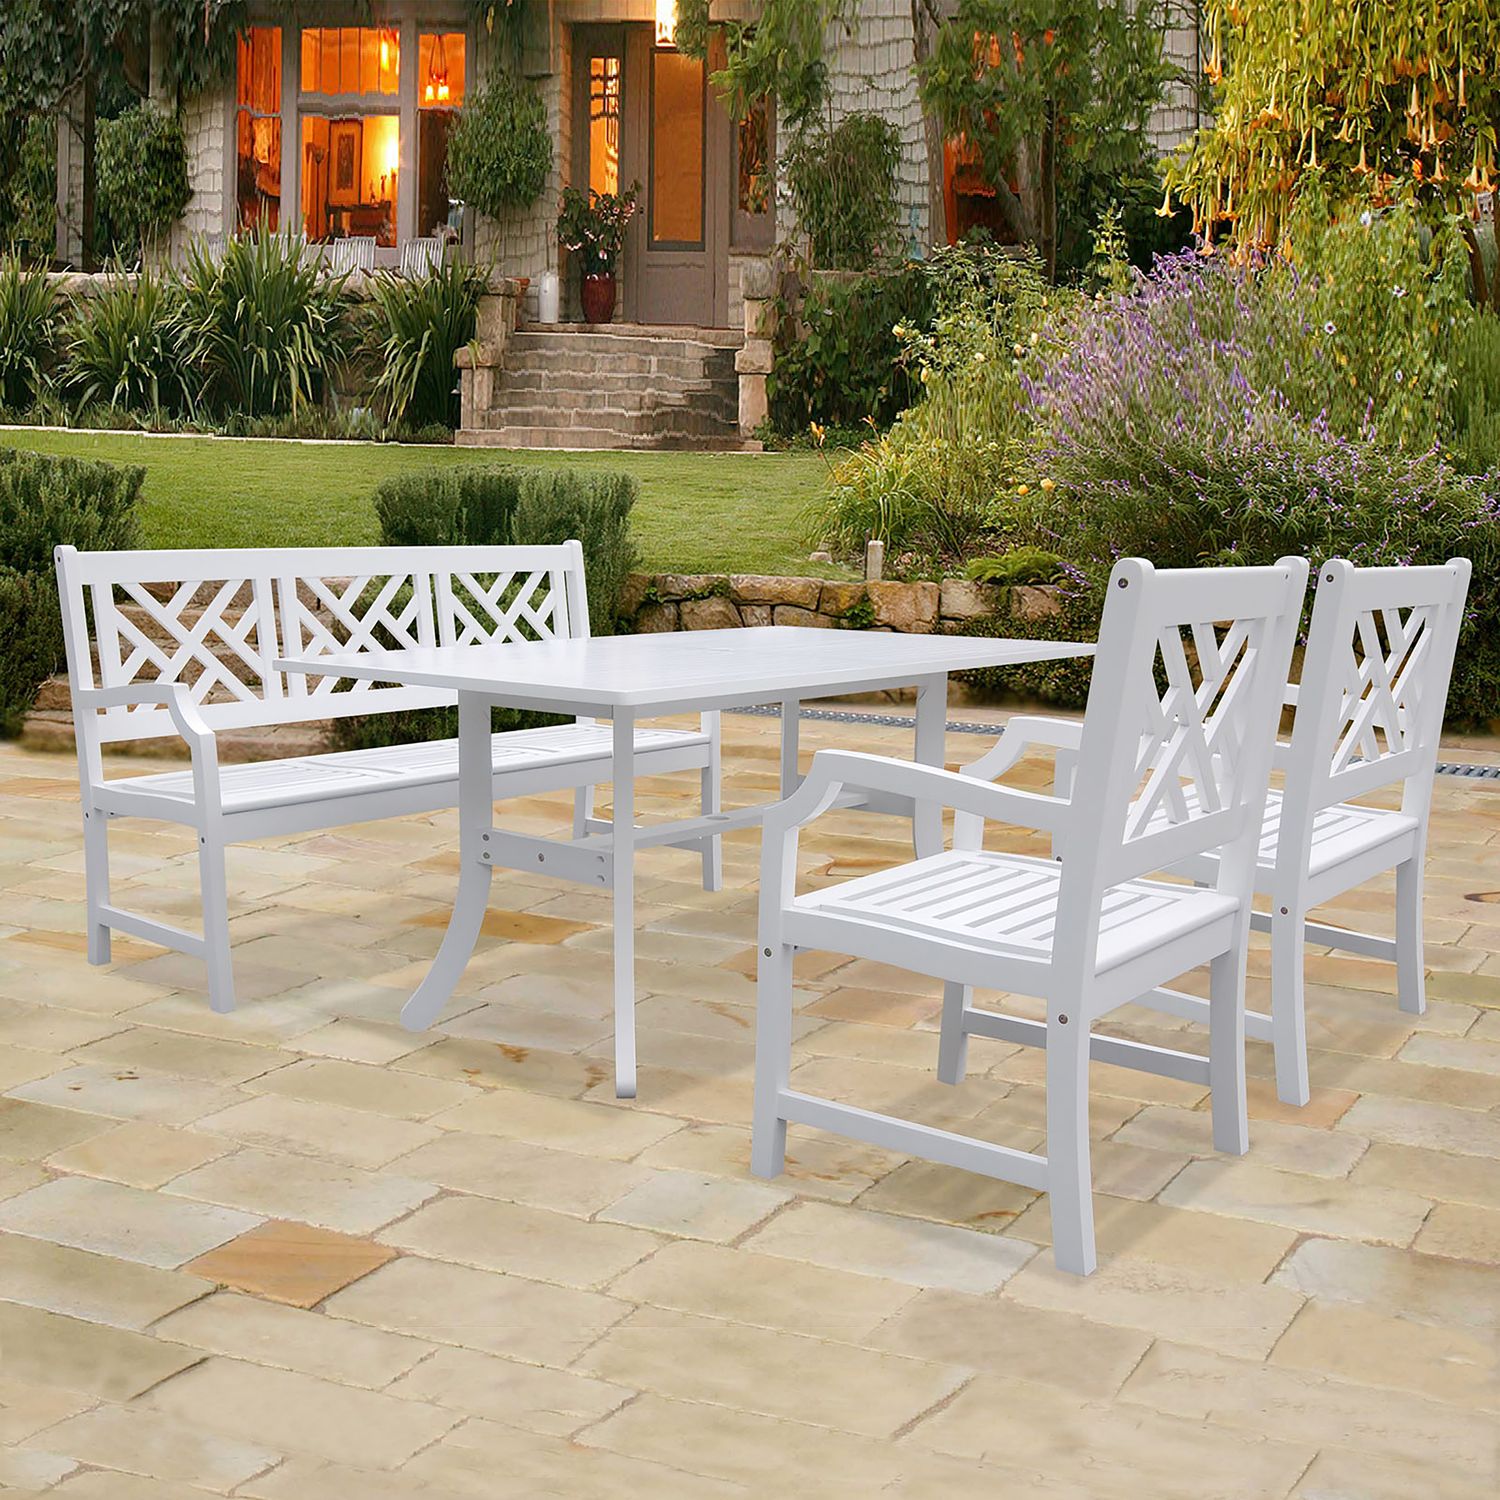 Bradley Outdoor 4-piece Wood Patio Dining Set with 5-foot Bench in White